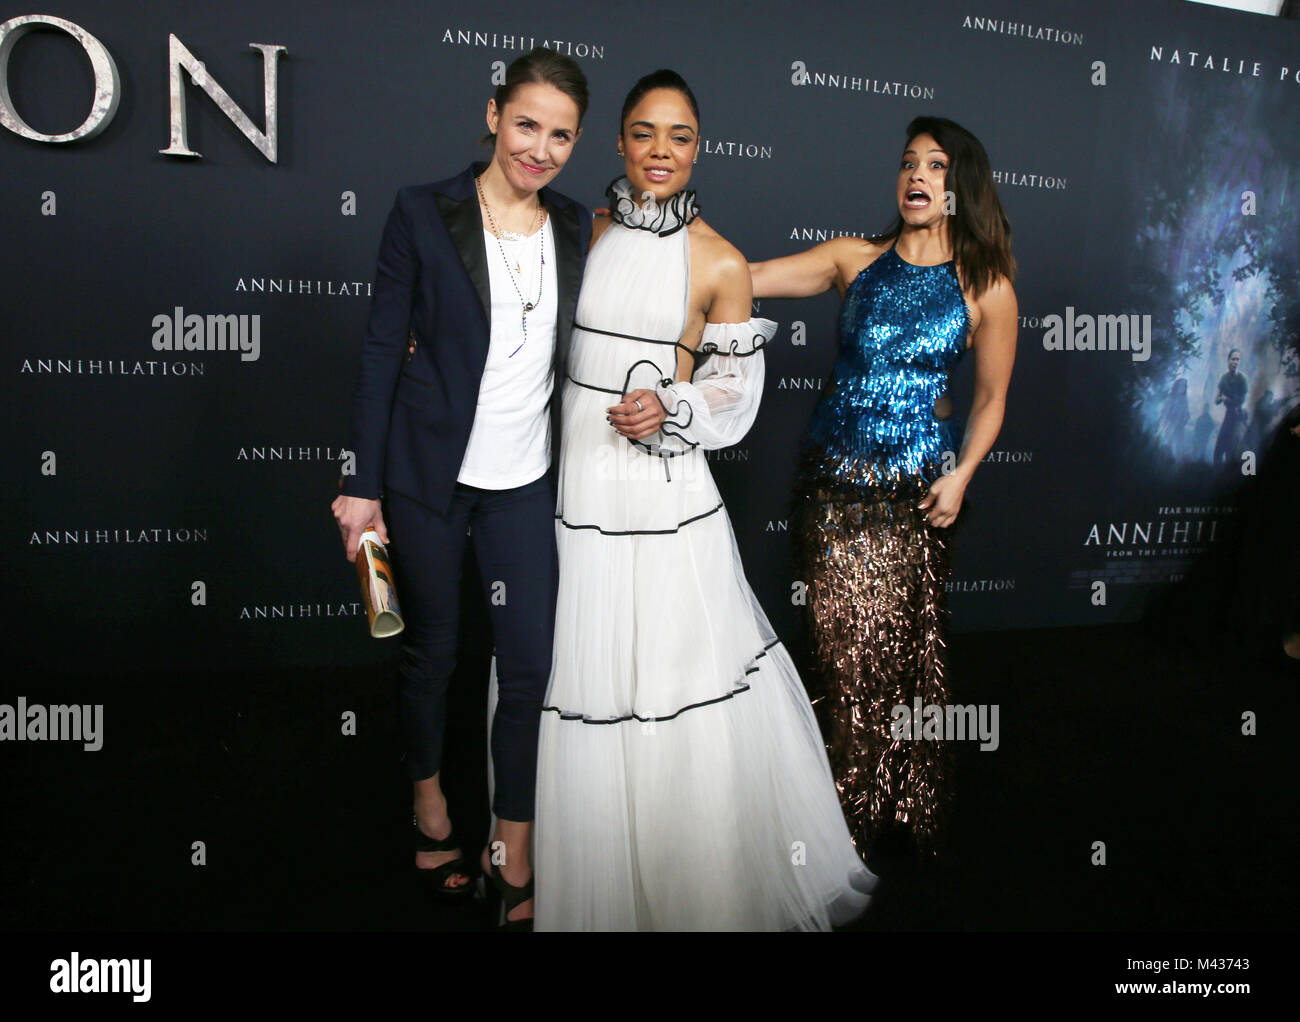 WESTWOOD, CA - FEBRUARY 13: Tuva Novotny, Tessa Thompson, Gina Rodriguez, at the Los Angeles Premiere Of Annihilation at the Regency Villages Theatre in Westwood, California on February 13, 2018. Credit: Faye Sadou/MediaPunch Stock Photo